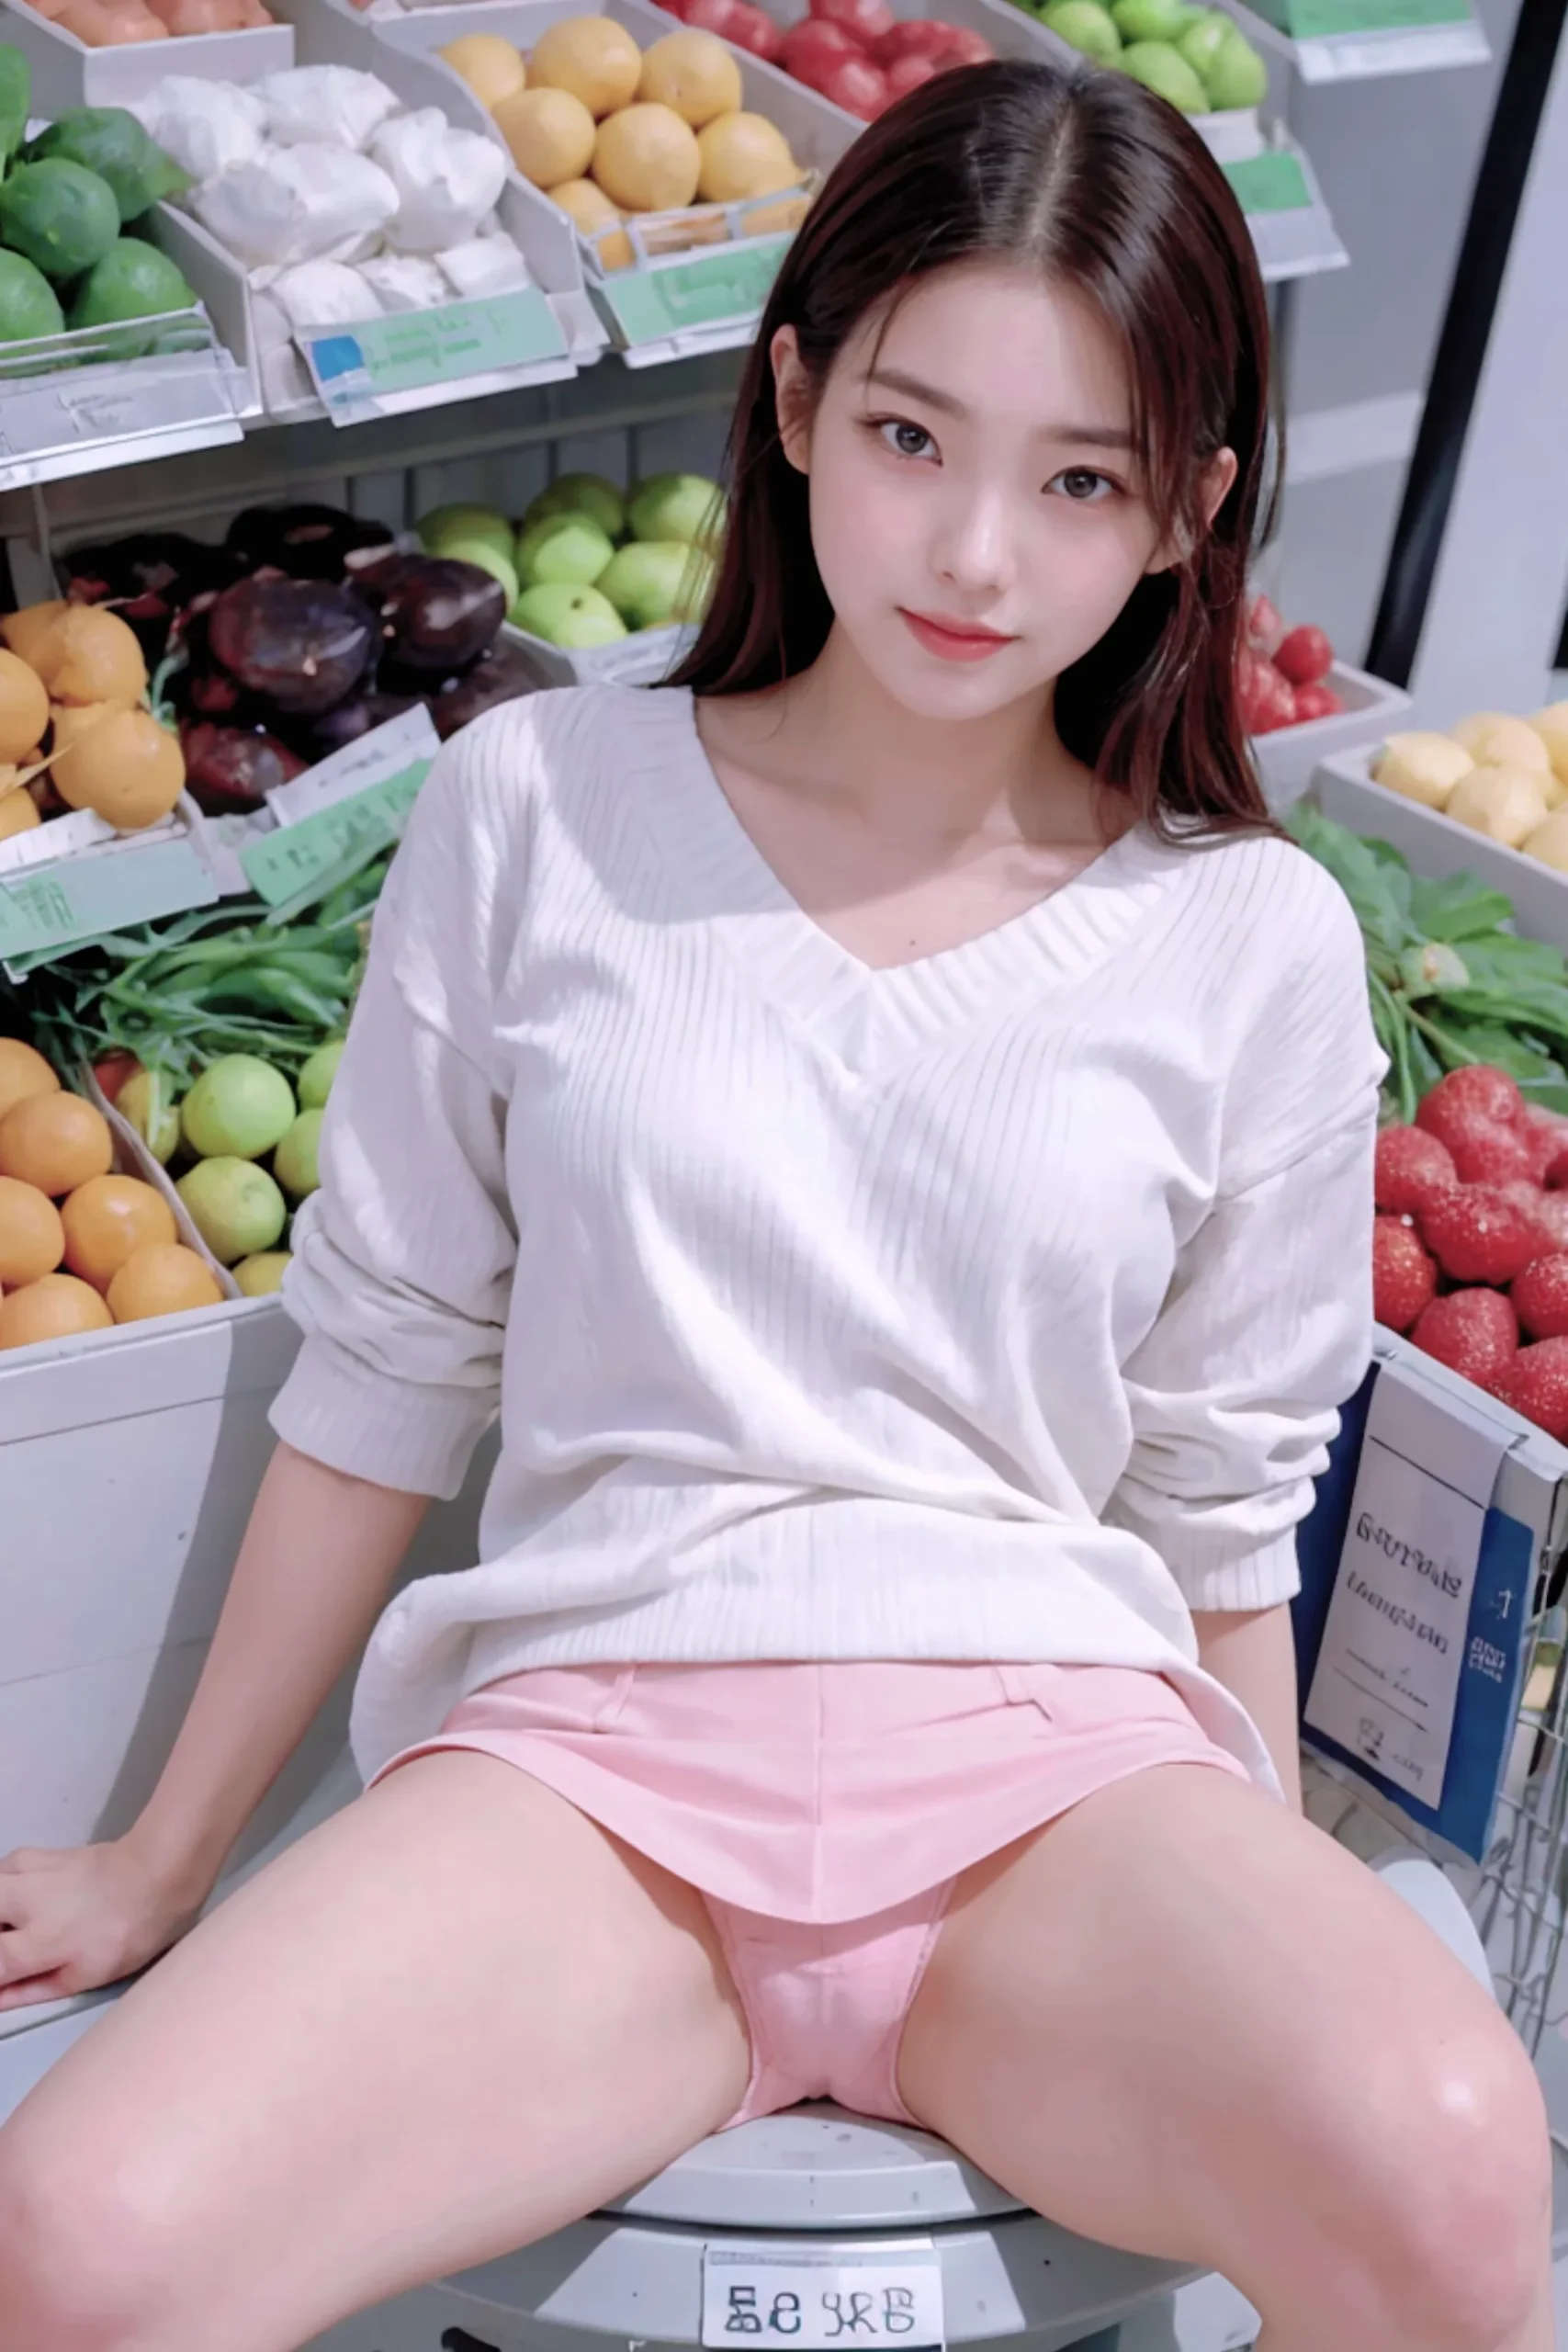 Young Lady Flashing Panties In A Store Images 02